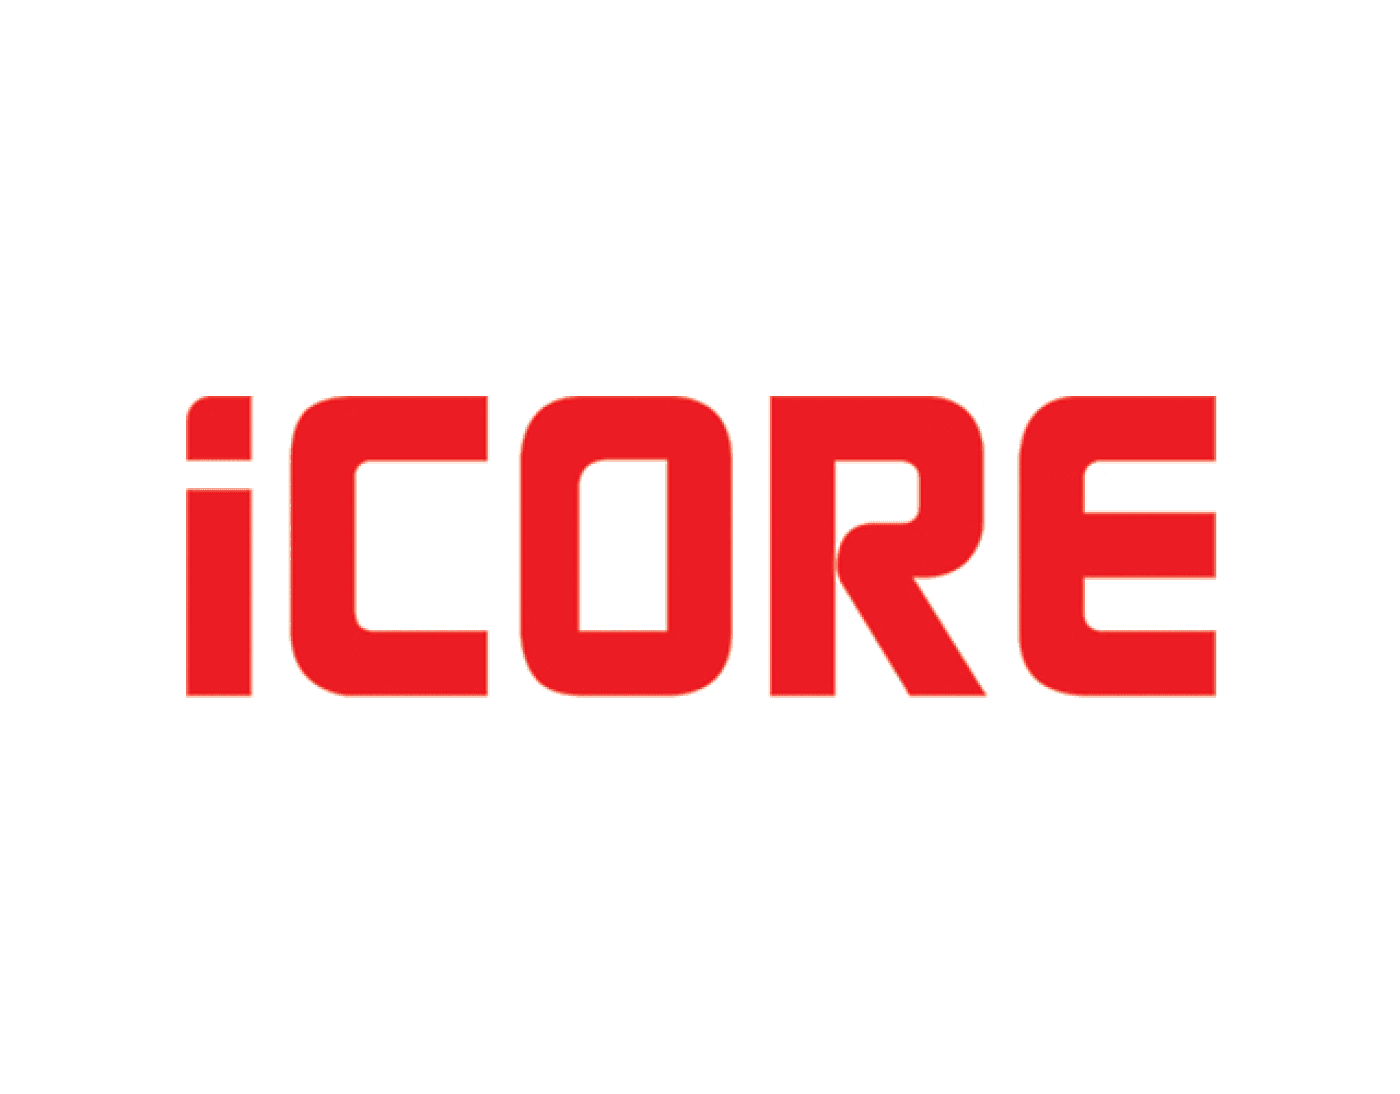 icore-640x500-2022-02.png